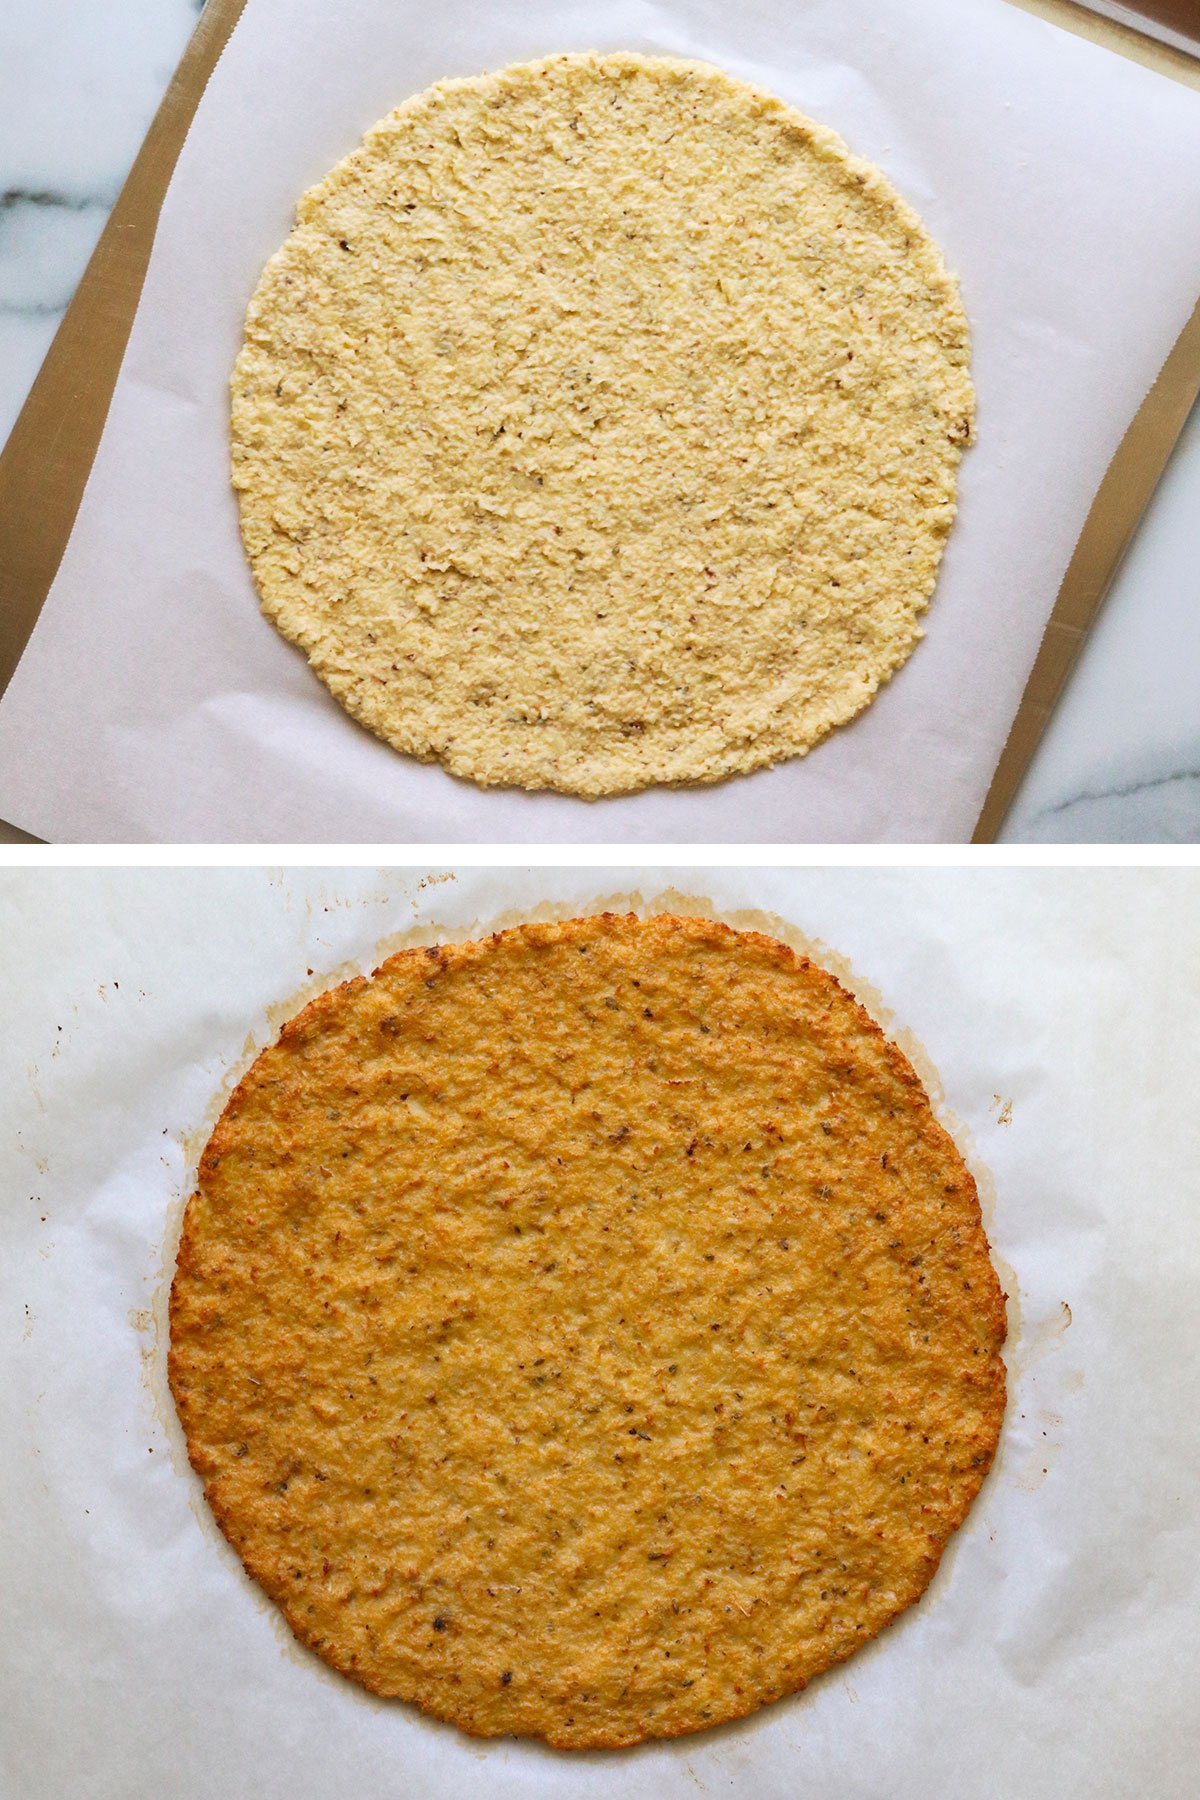 cauliflower pizza crust on a baking sheet before and after baking.